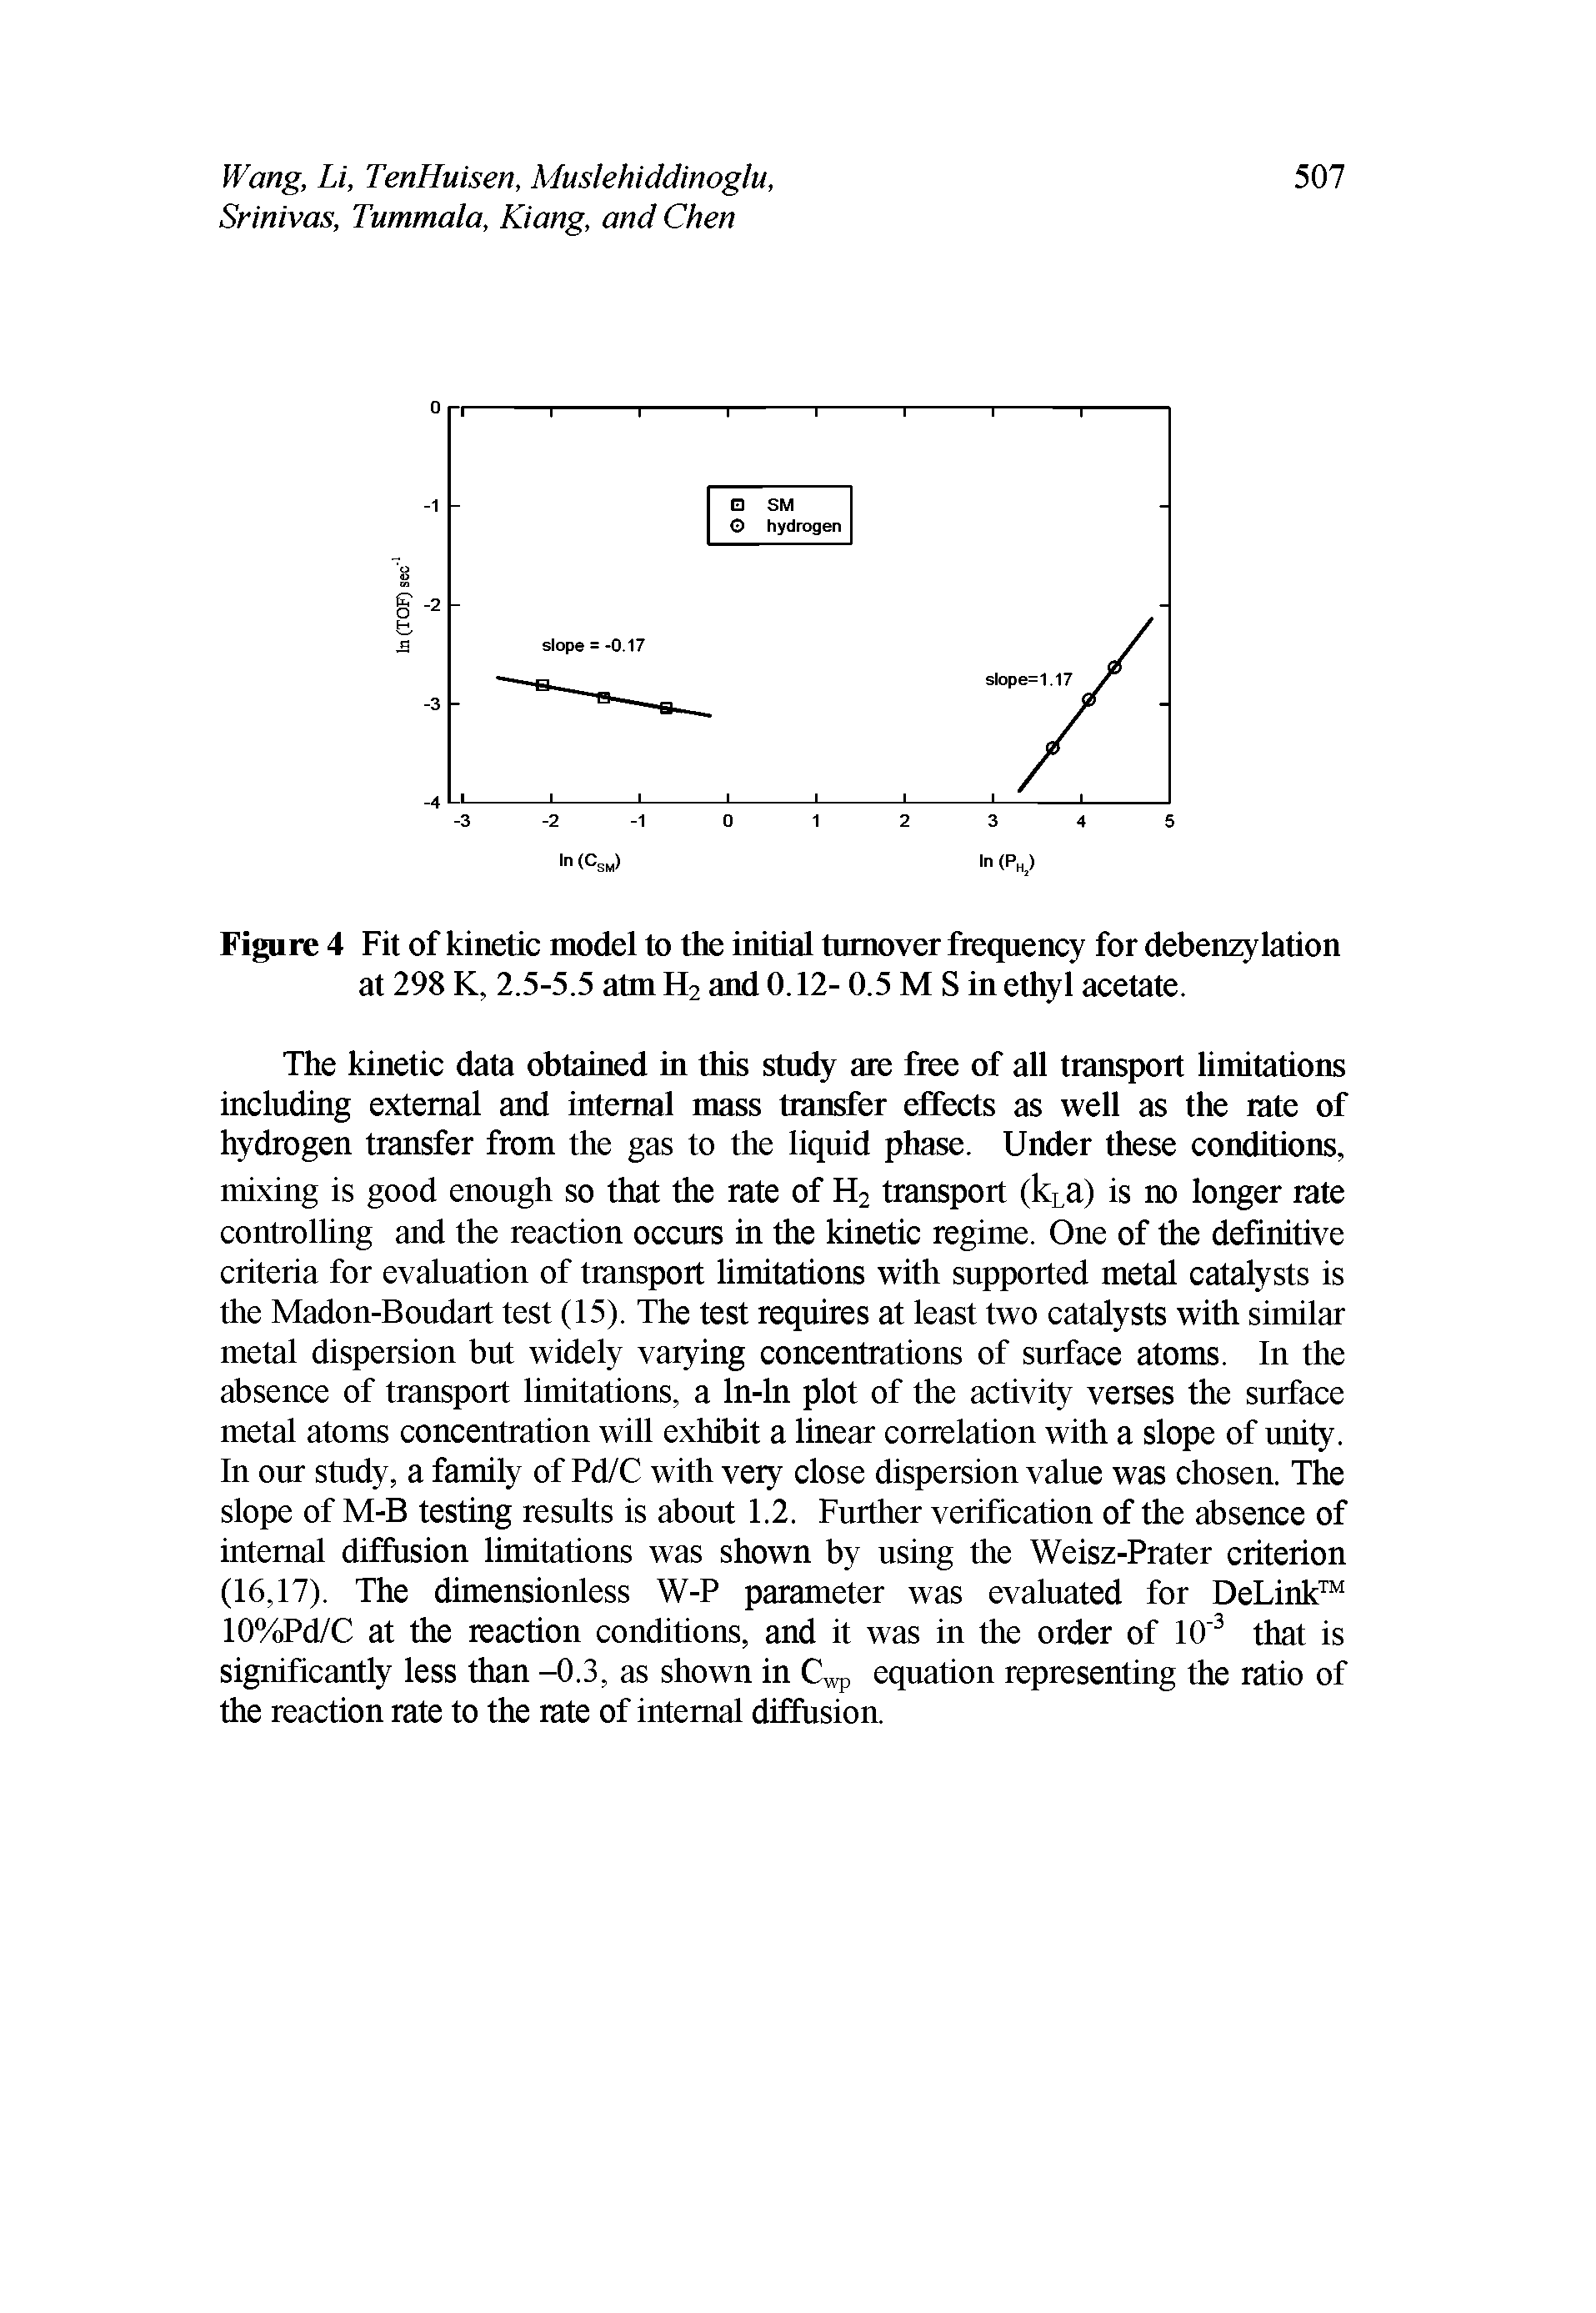 Figure 4 Fit of kinetic model to the initial turnover frequency for debenzy lation at 298 K, 2.5-5.5 atm H2 and 0.12- 0.5 M S in ethyl acetate.